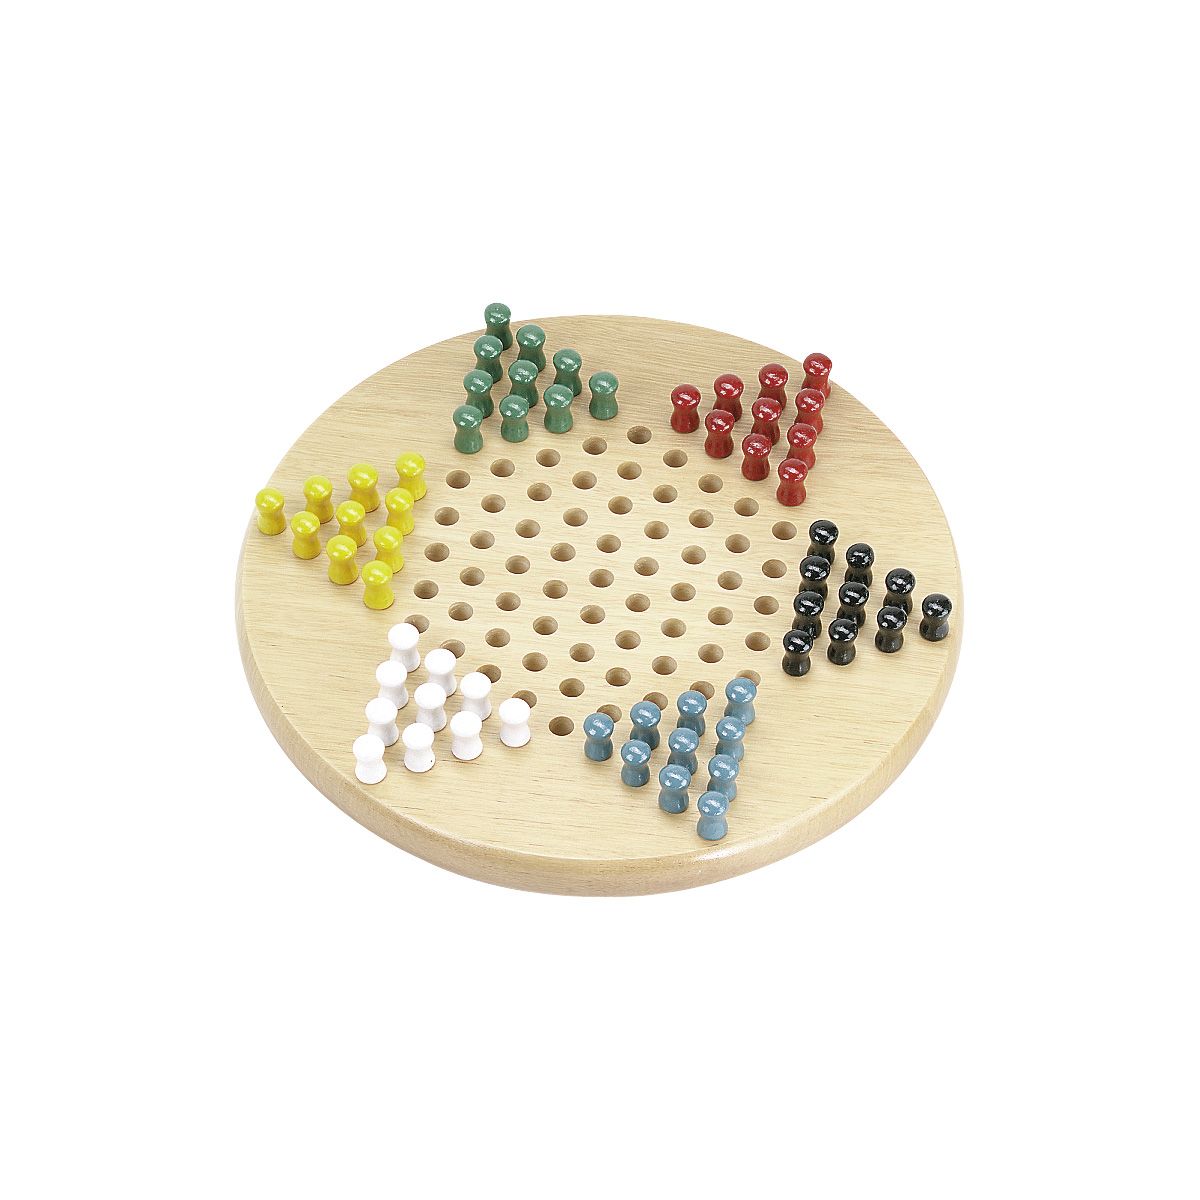 11" Standard Chinese Checkers